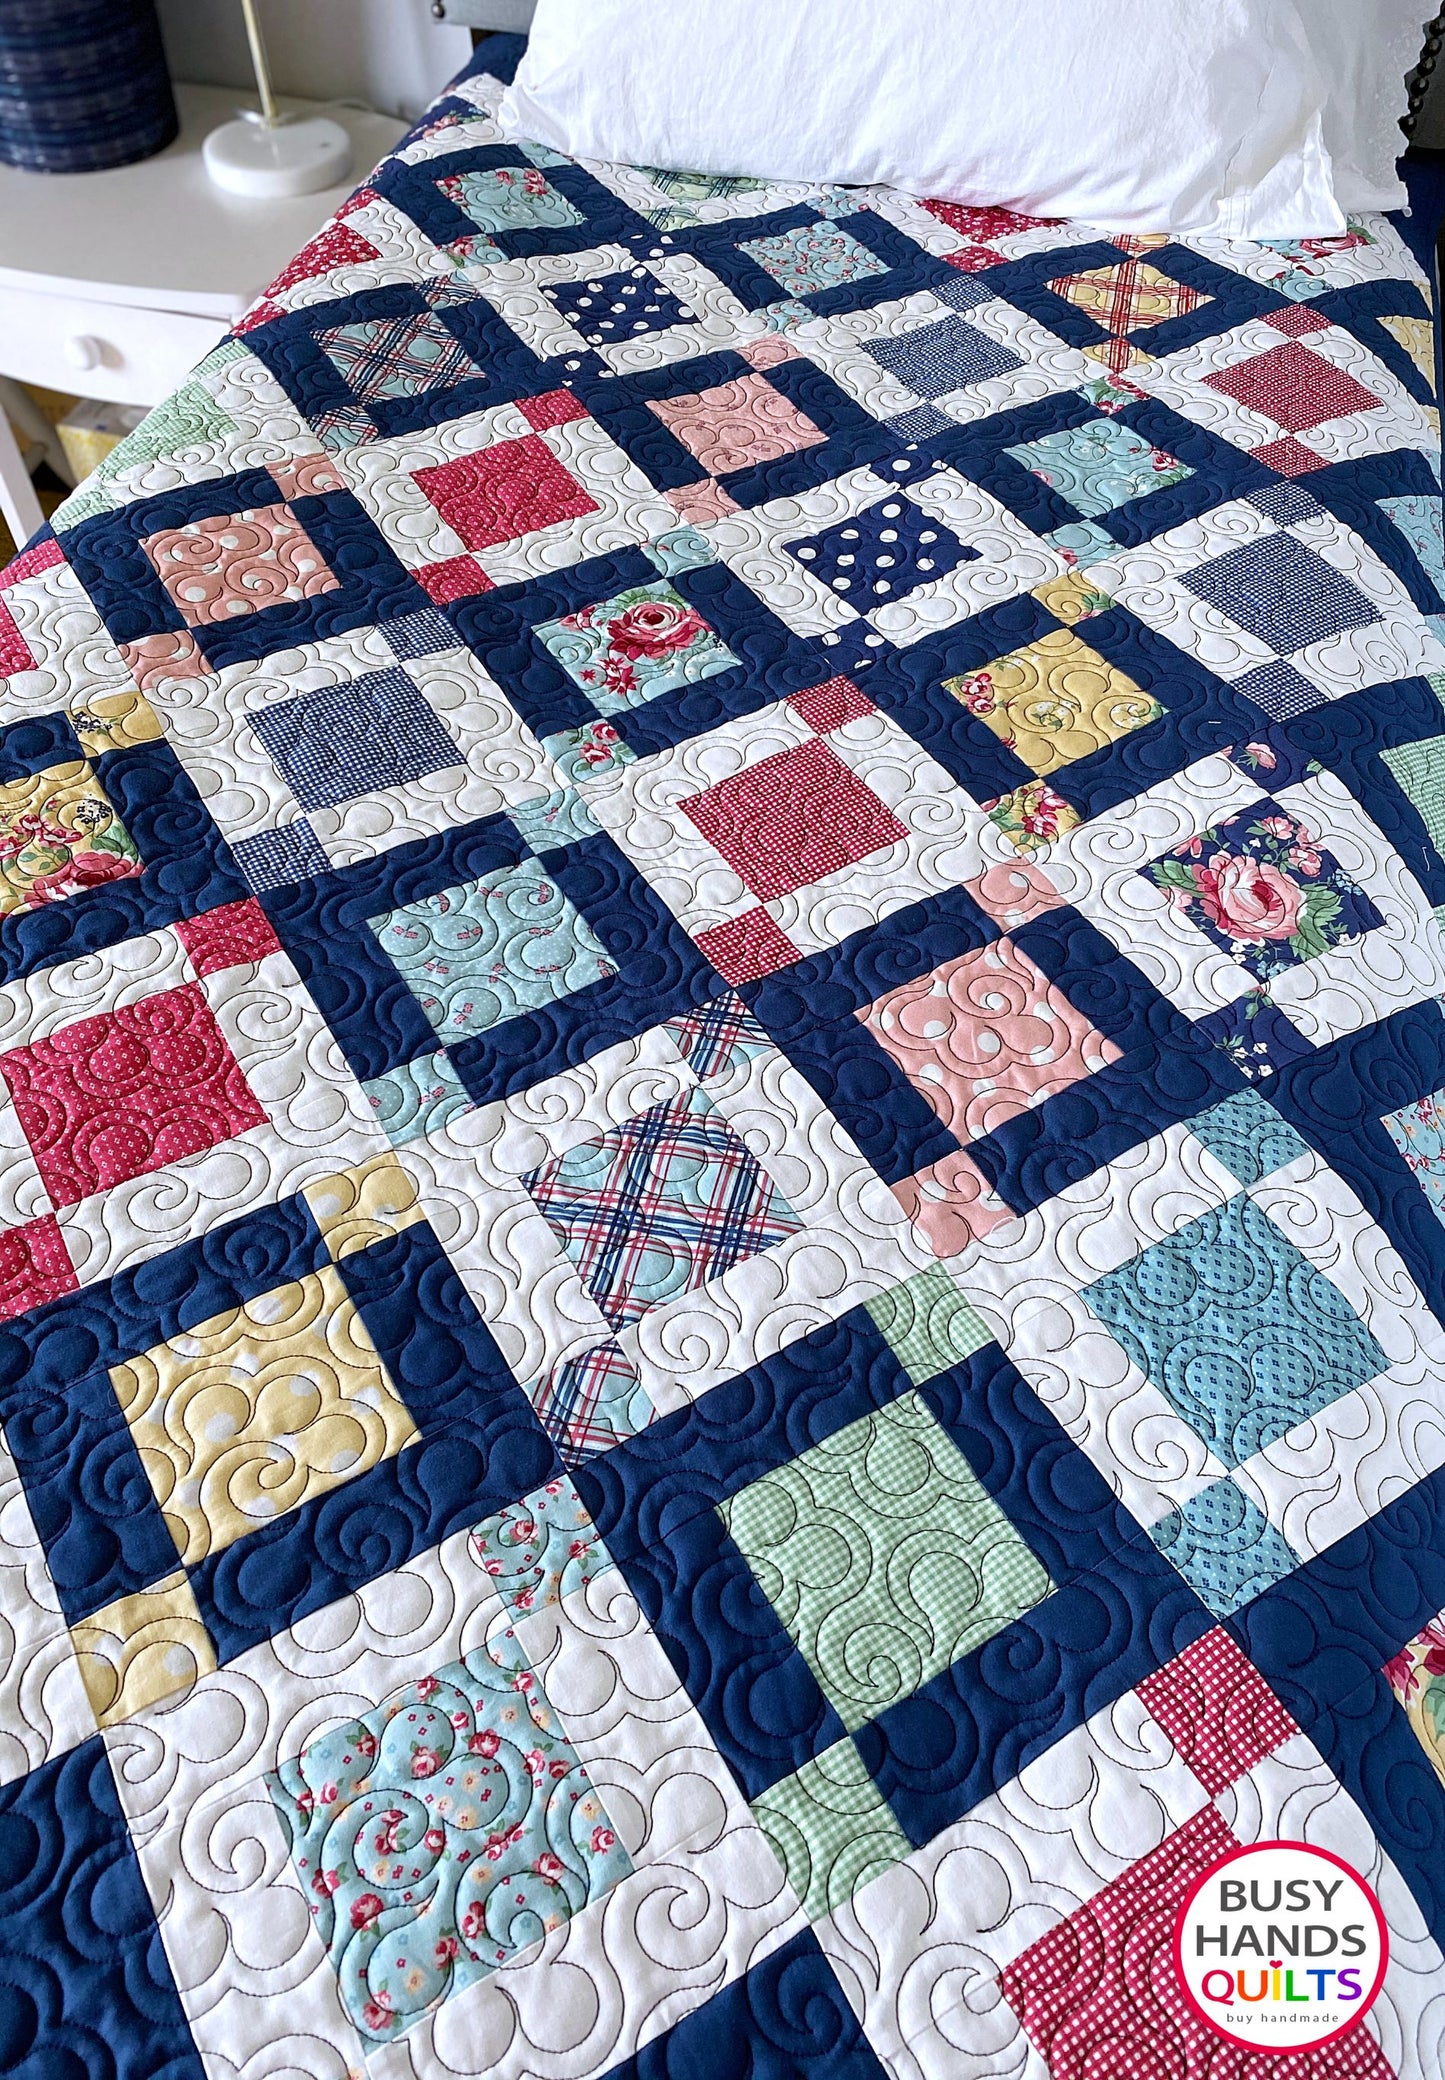 Woven Windows Quilt Pattern PDF DOWNLOAD Busy Hands Quilts $12.99